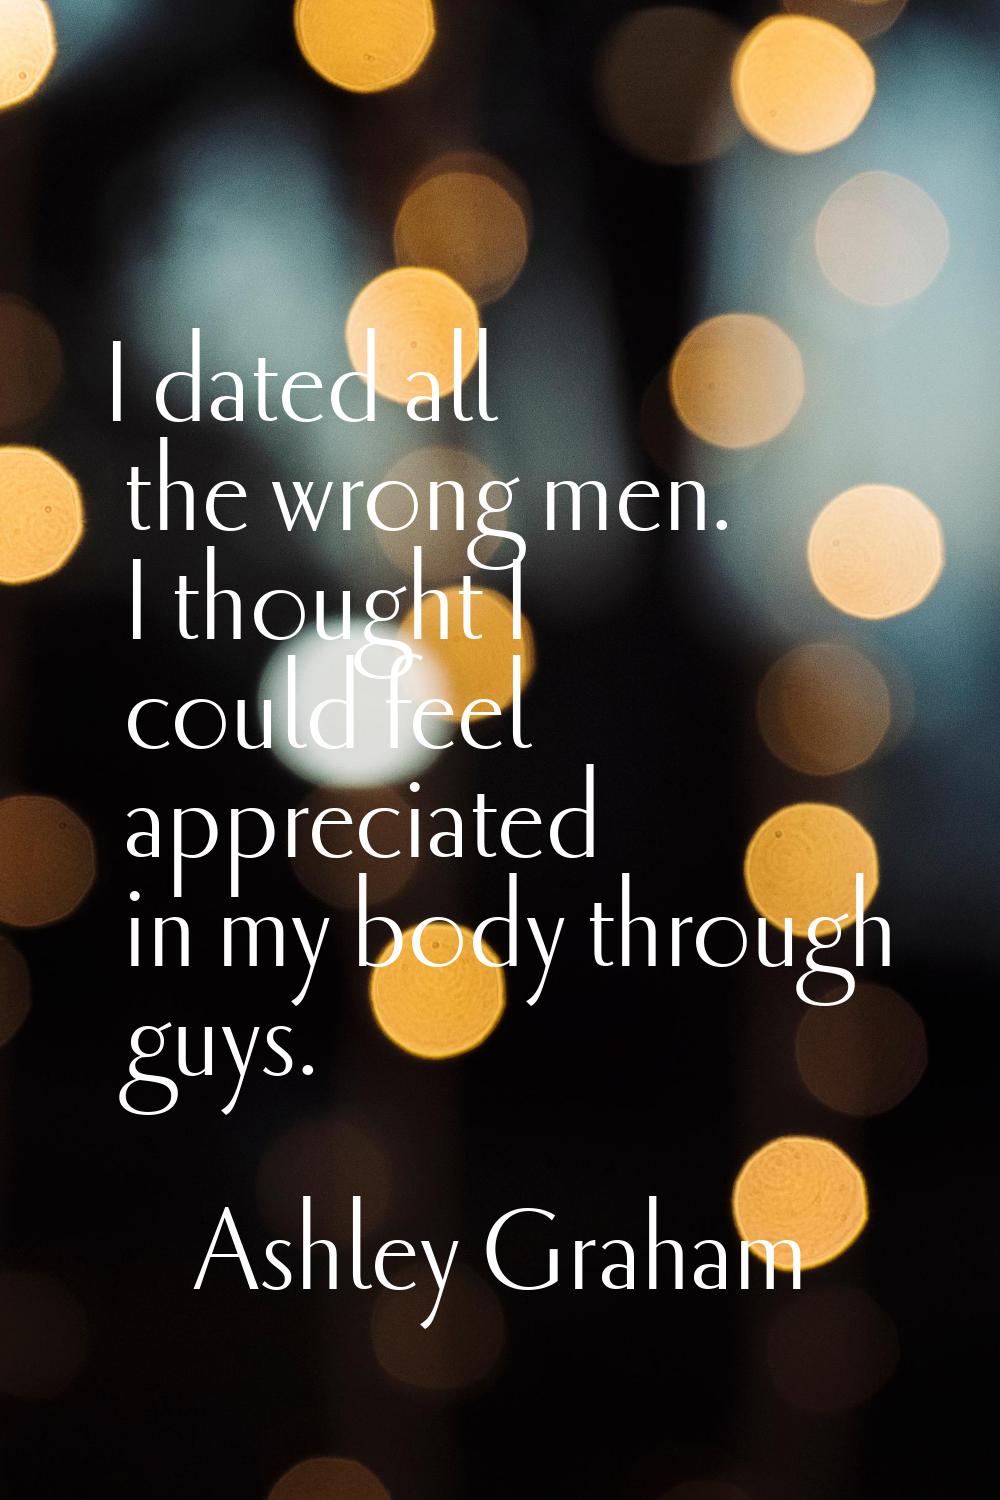 I dated all the wrong men. I thought I could feel appreciated in my body through guys.